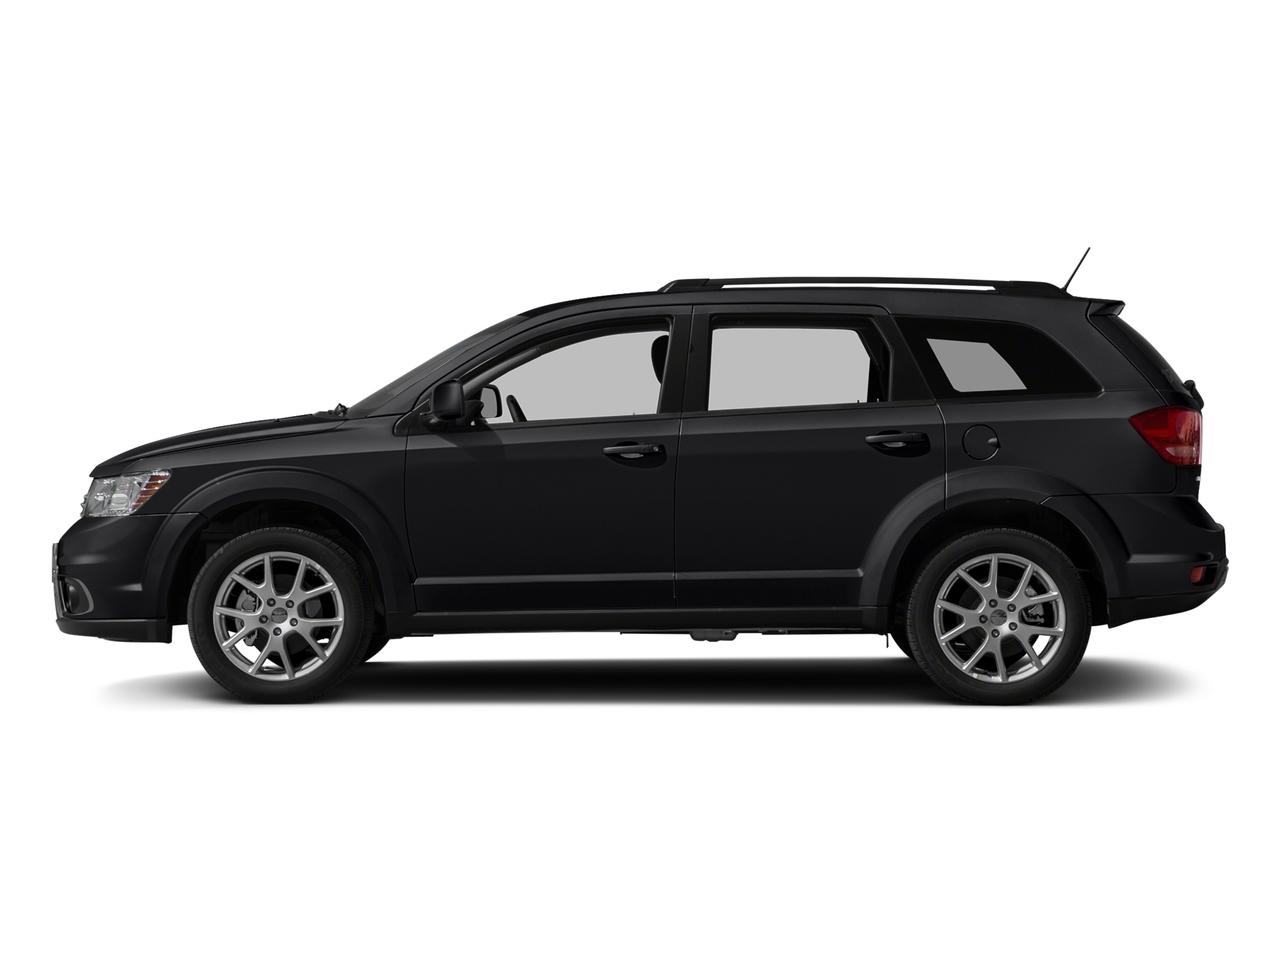 Used 2018 Dodge Journey SXT with VIN 3C4PDCBB9JT439432 for sale in Fort Stockton, TX